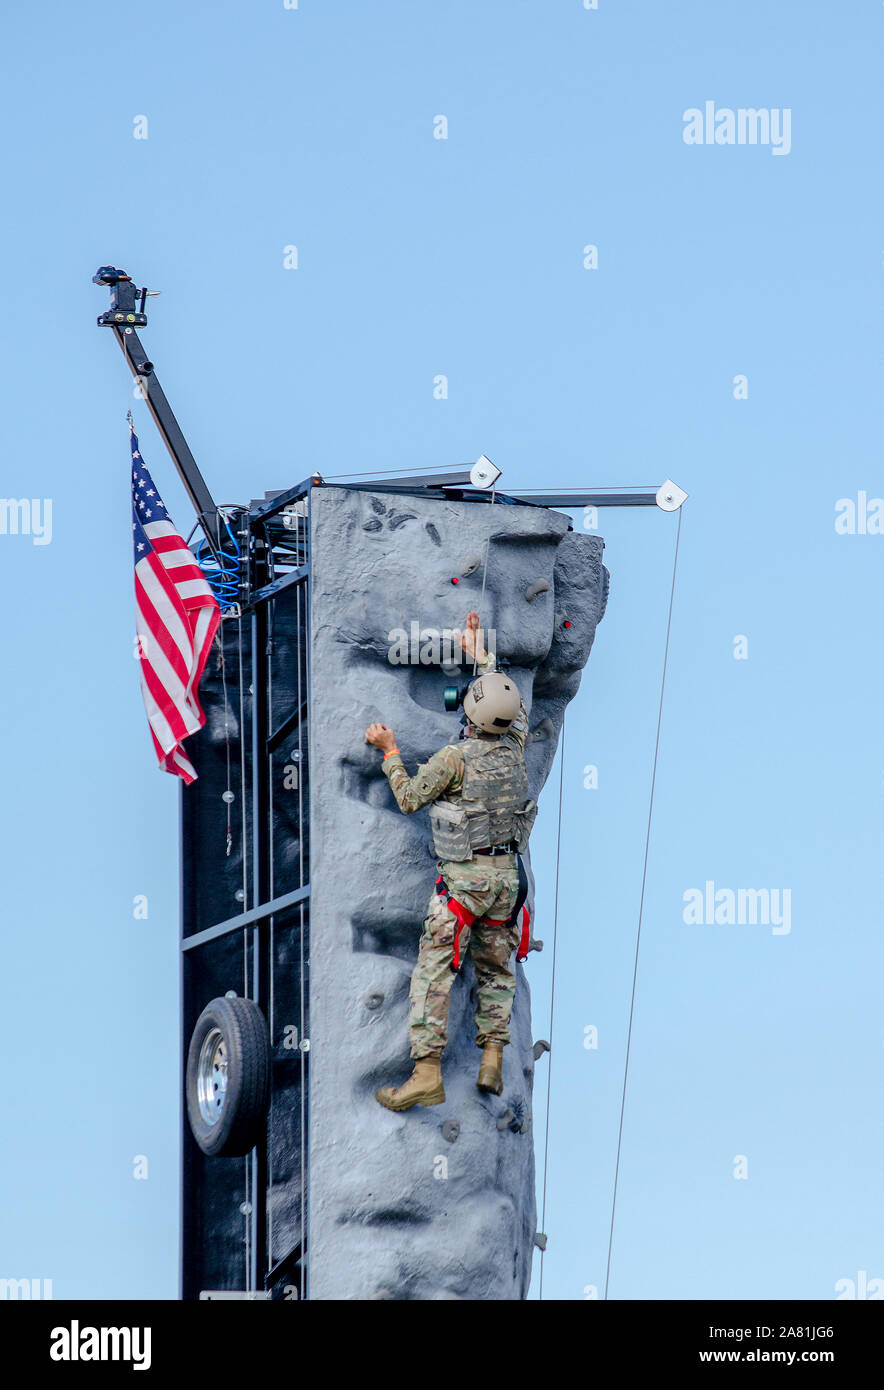 Kalamazoo Michigan USA July 3 2017; an army soldier demonstrates tactical scaling of a tall climbing wall, to show  the challenges faced by military Stock Photo